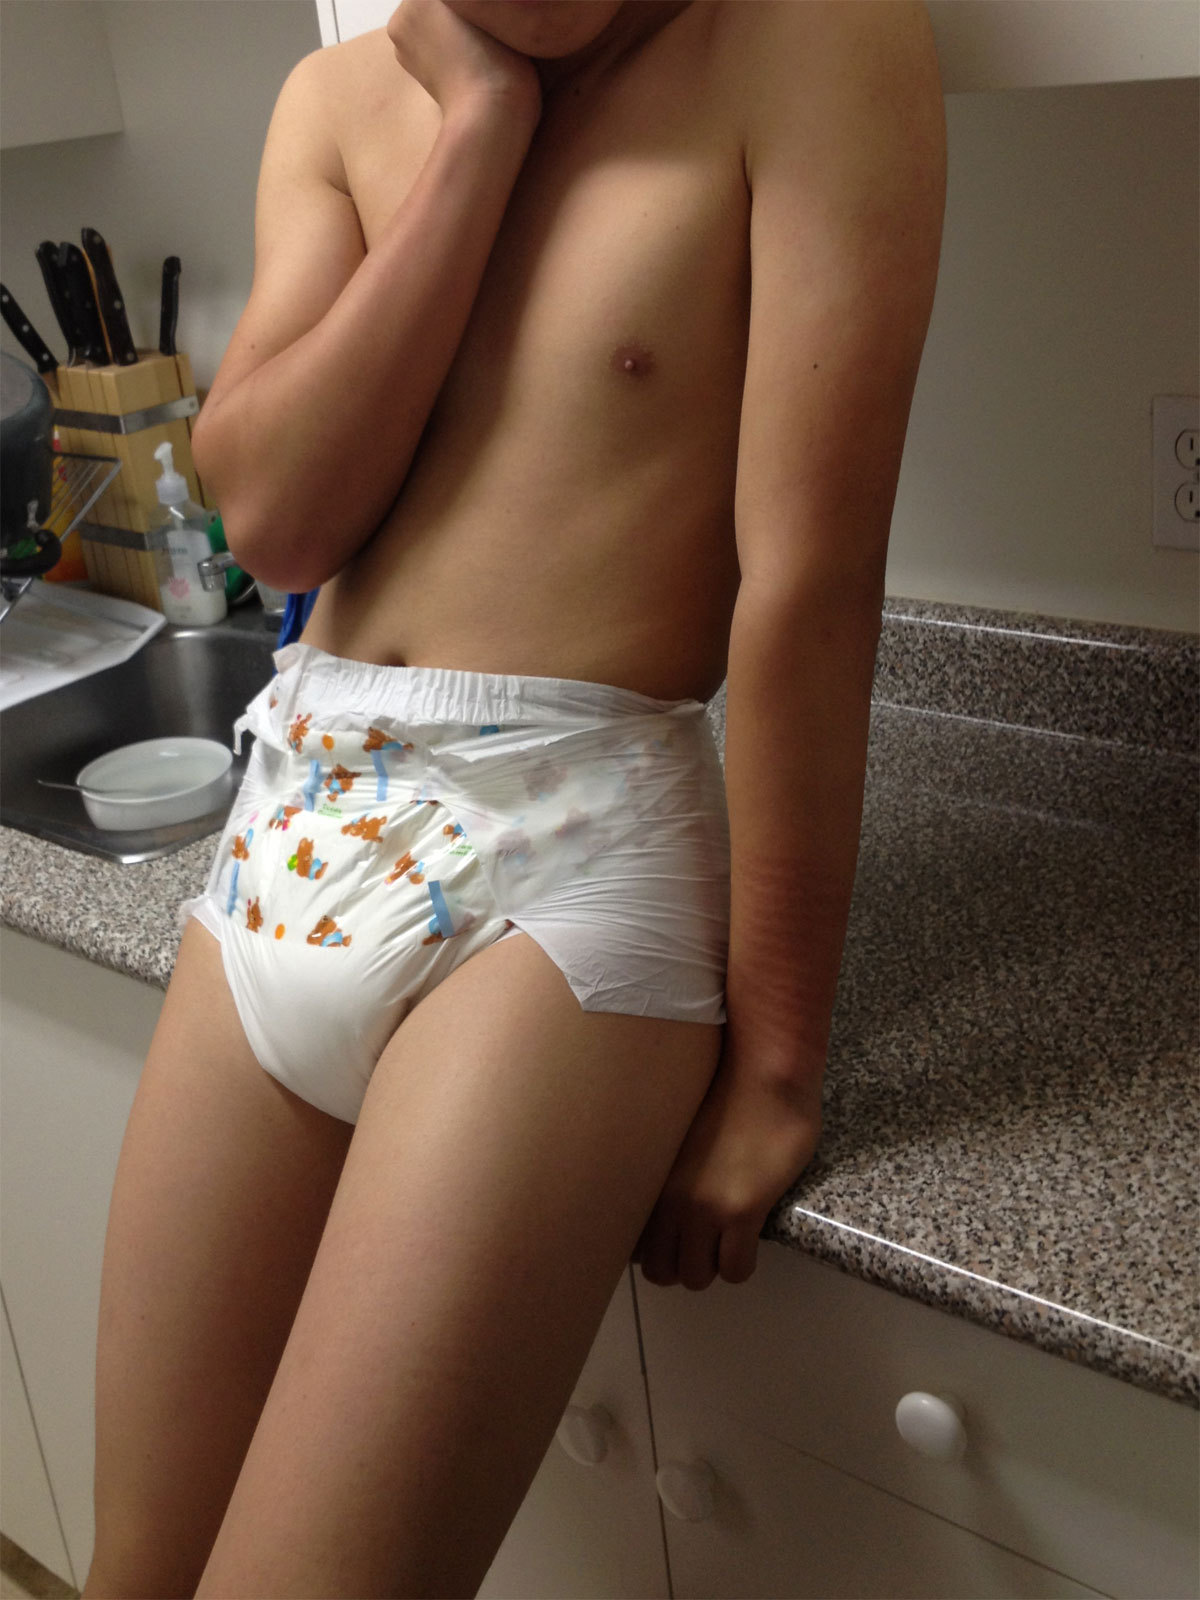 Girls forced into wearing diapers